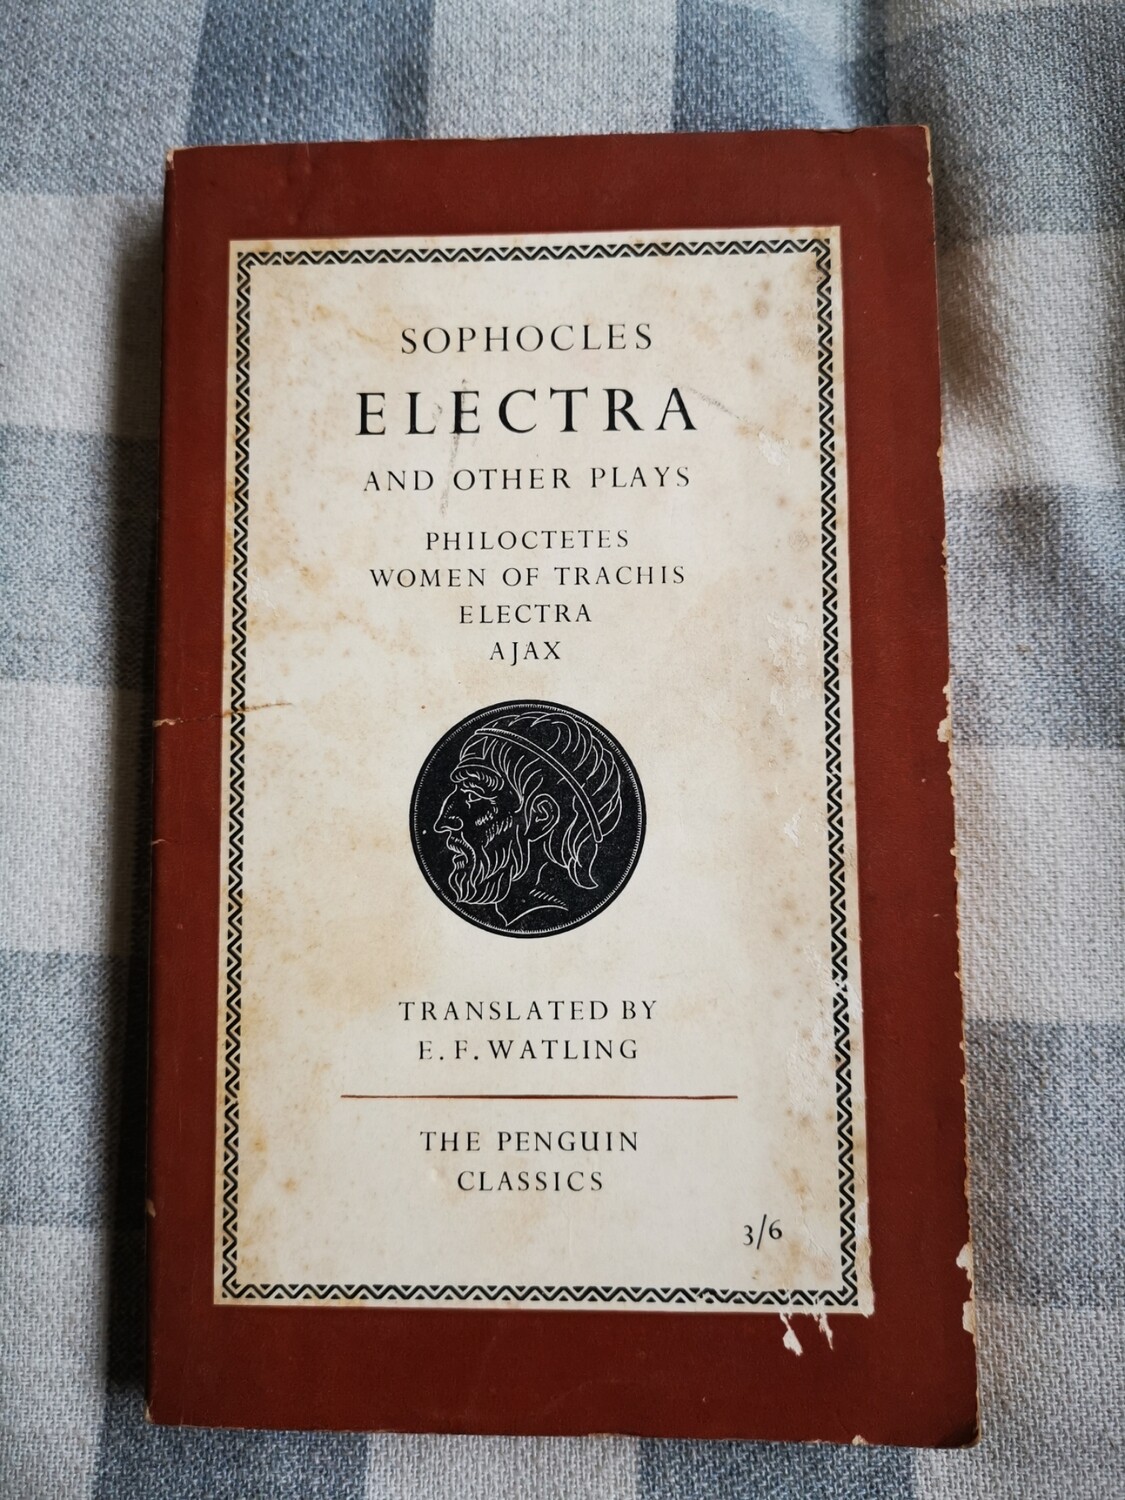 Electra and other plays, Sophocles